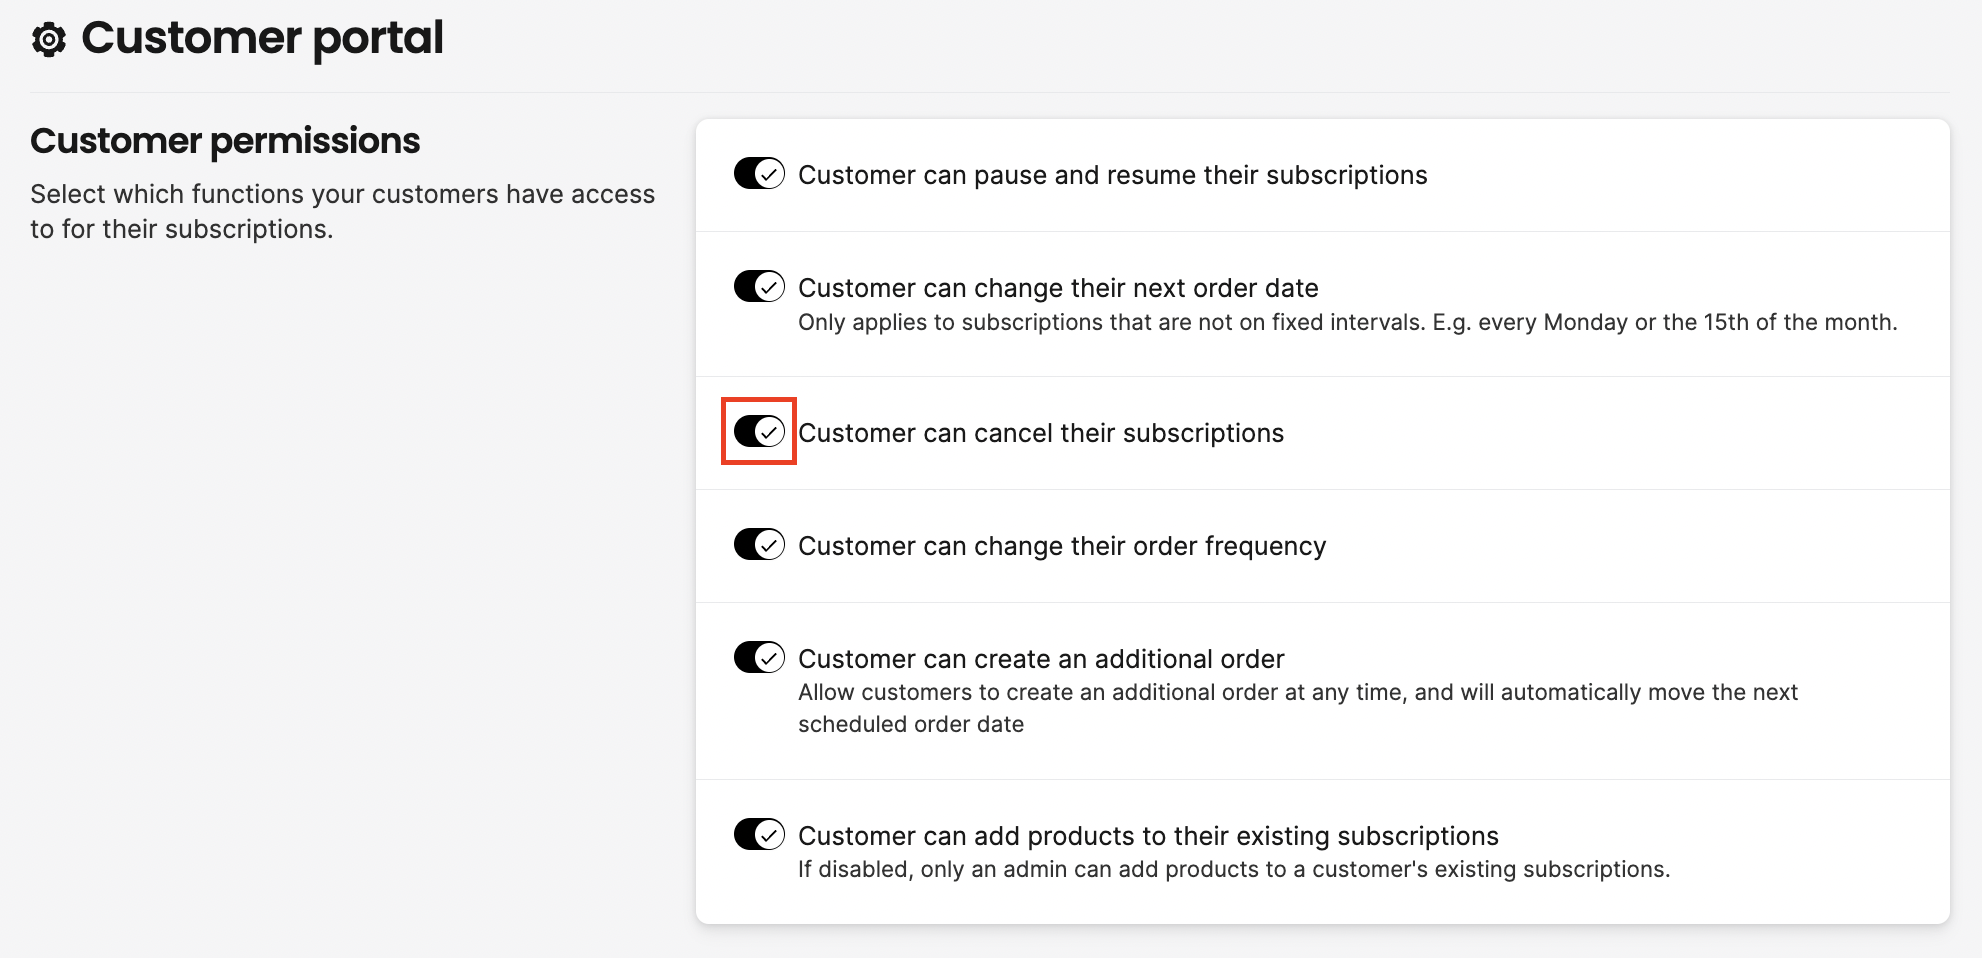 Customer can cancel their subscriptions